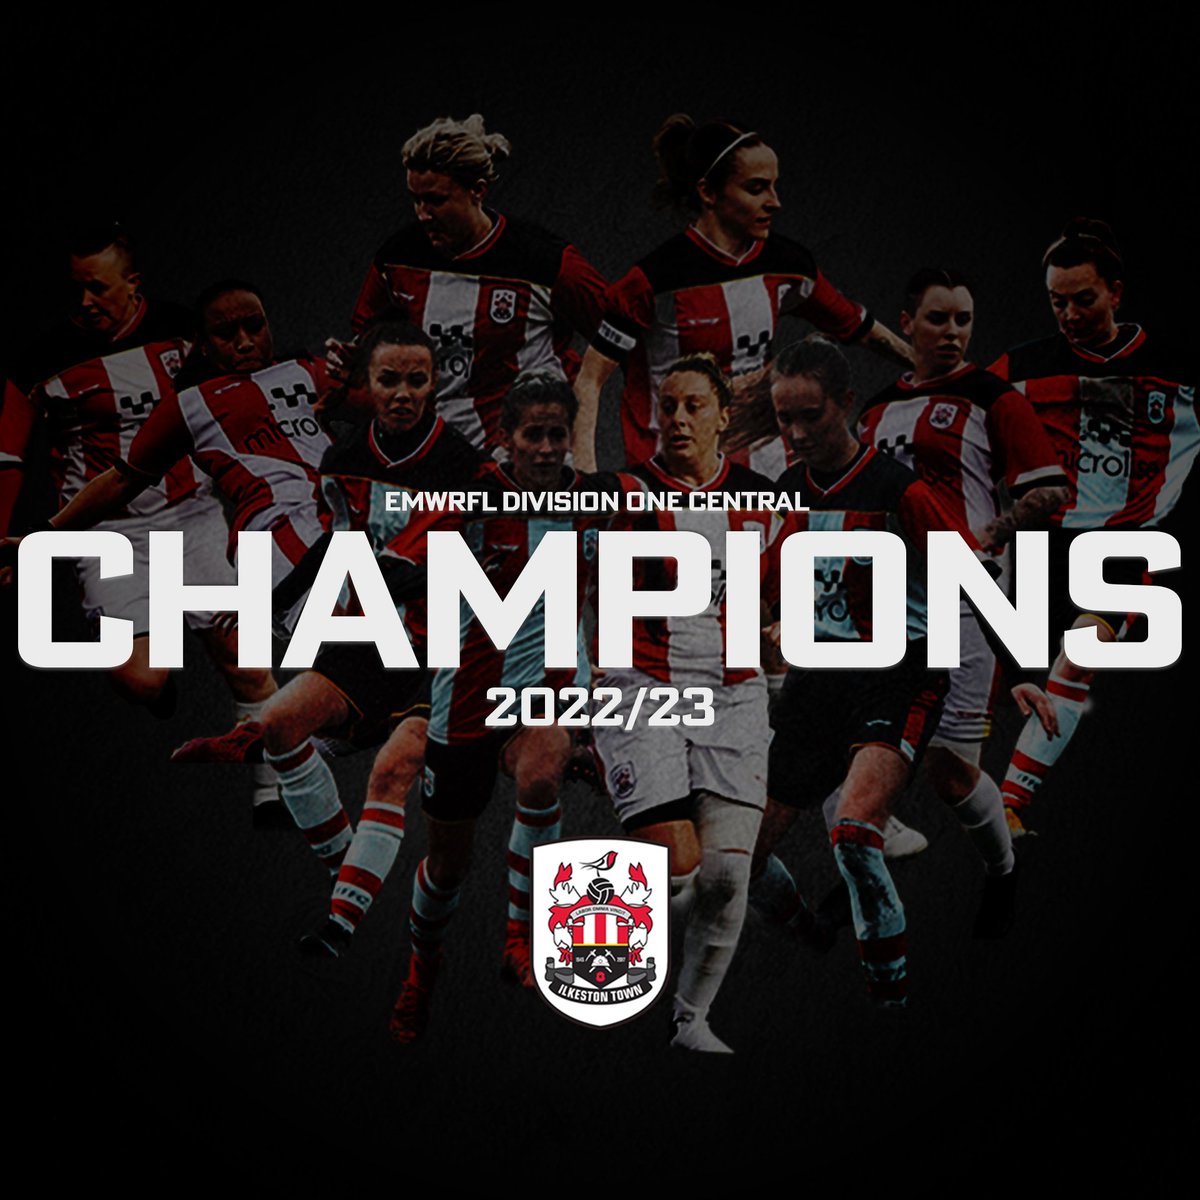 CHAMPIONS

We are delighted to announce that we have won the Div1 Central East Midlands Women's Regional League. 🏆👆🏼

Bring on the Regional Prem next season! 🎉

#OneTownOneClub 🔴⚪⚫